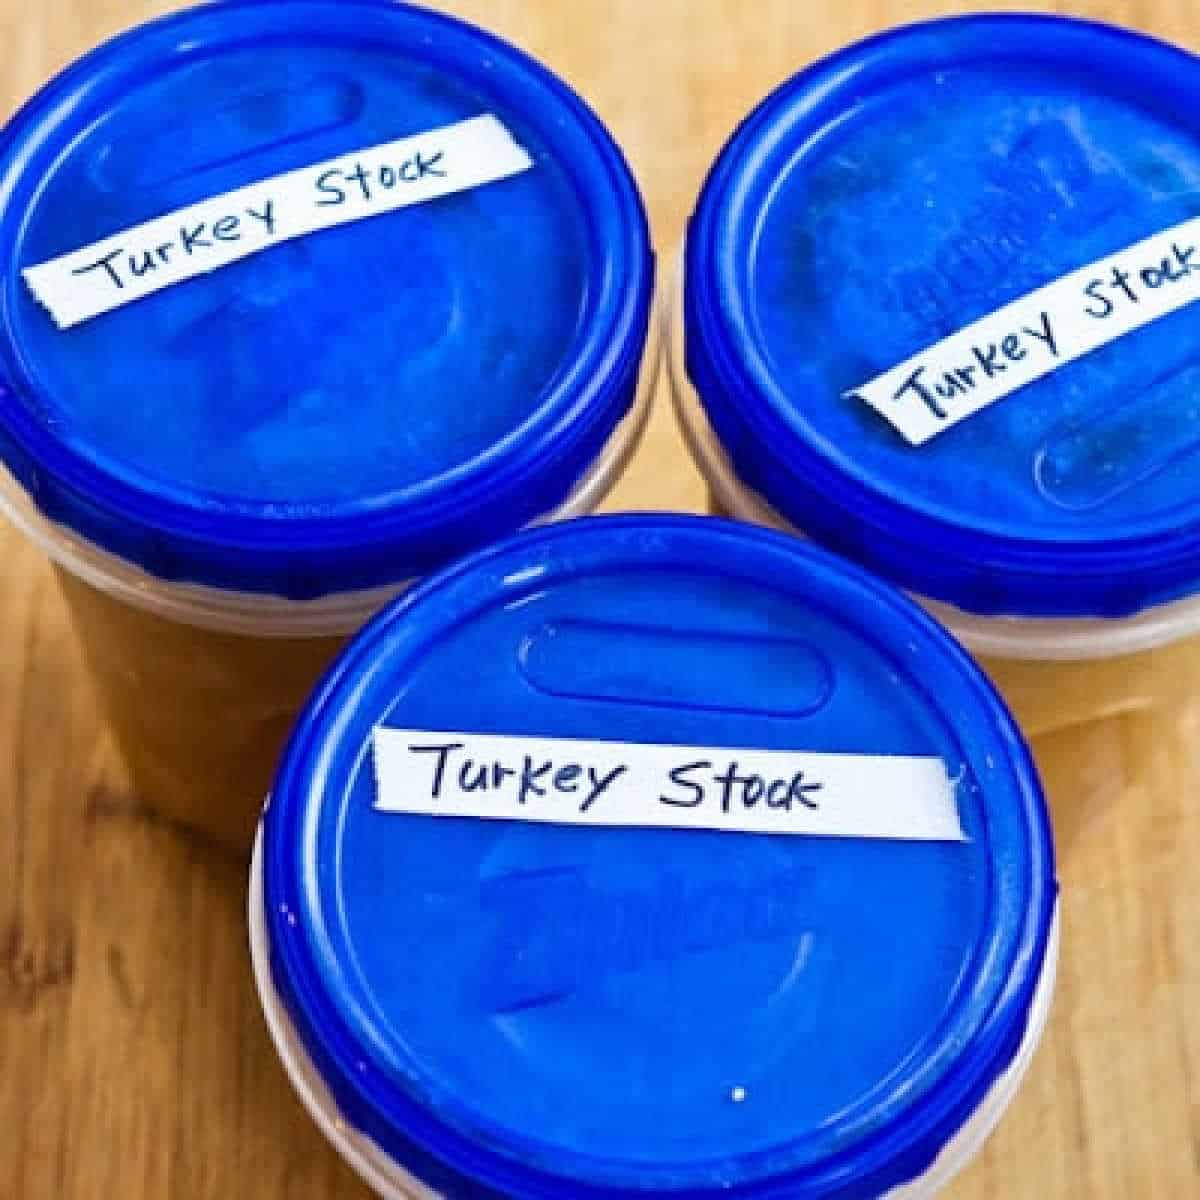 How to make Turkish stock showing stock in freezer containers